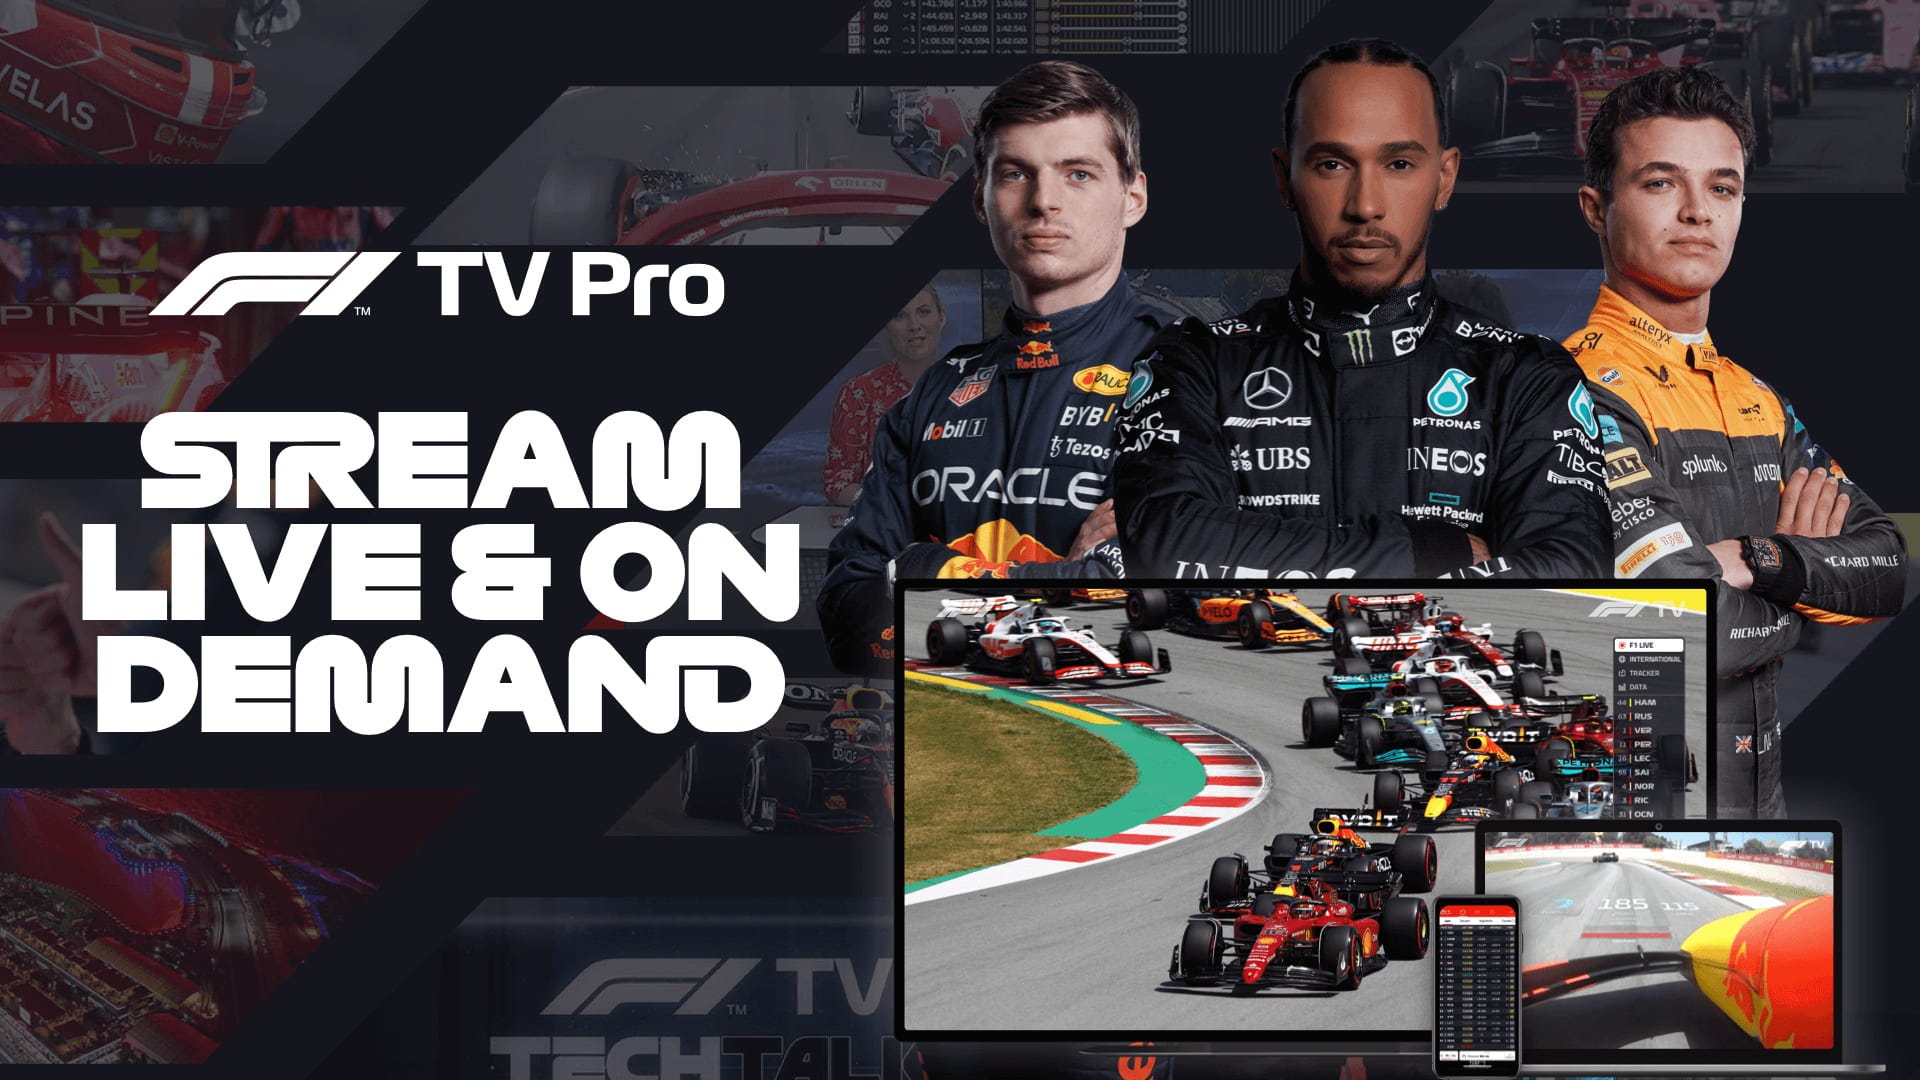 The Streaming Revolution How F1 TV Pro is Driving Revenue and Redefining Fan Engagement by Rupesh N